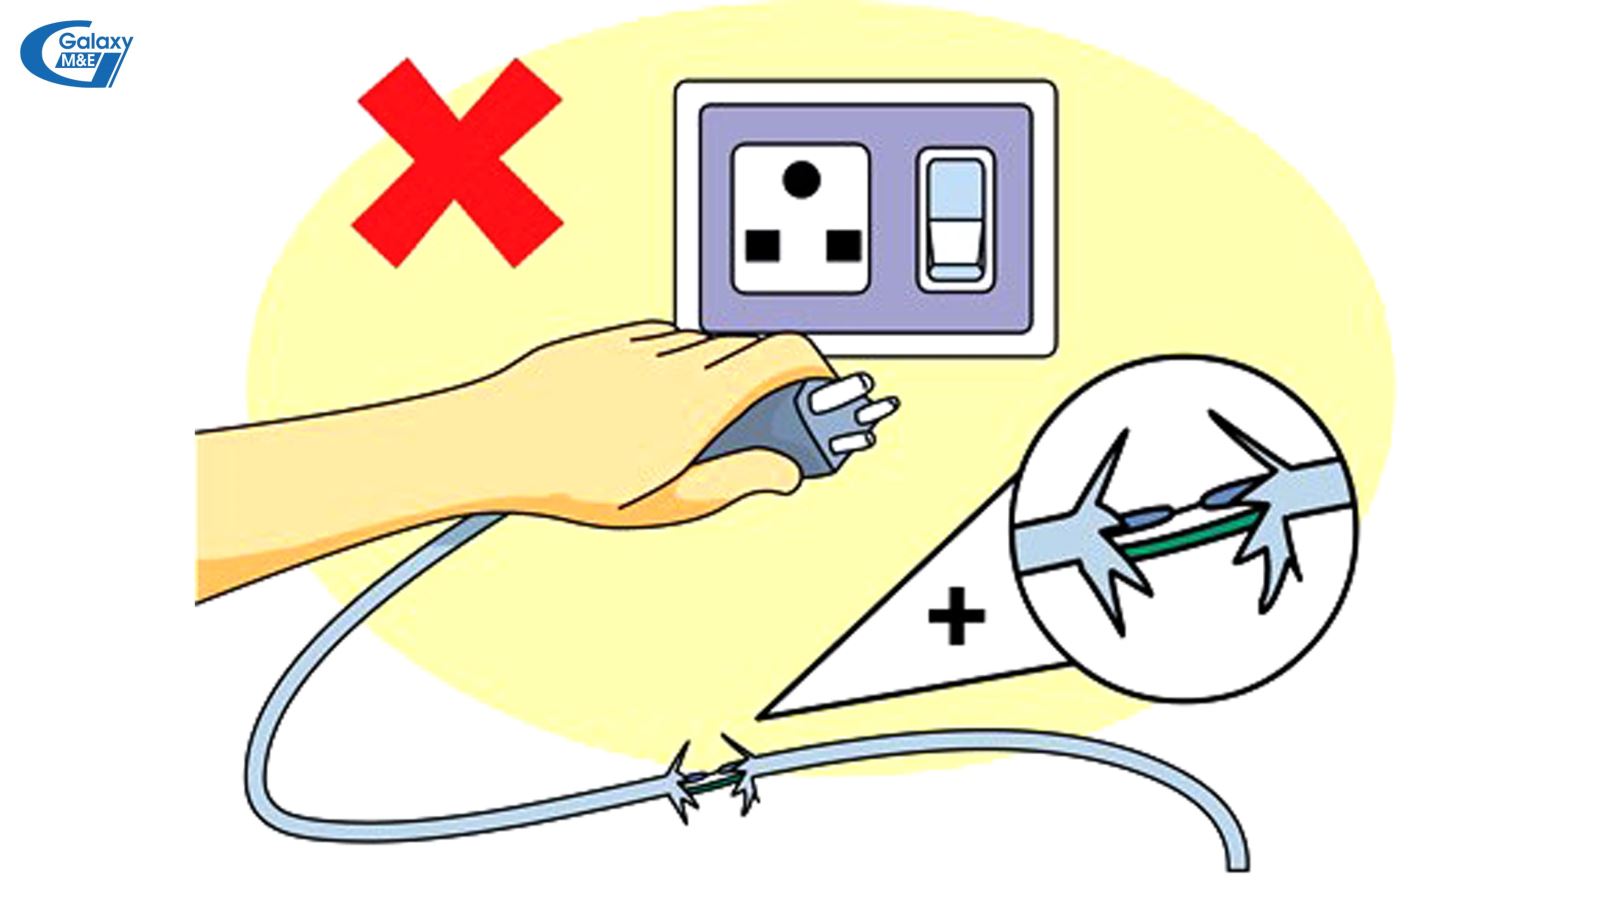 Staying safe of electricity